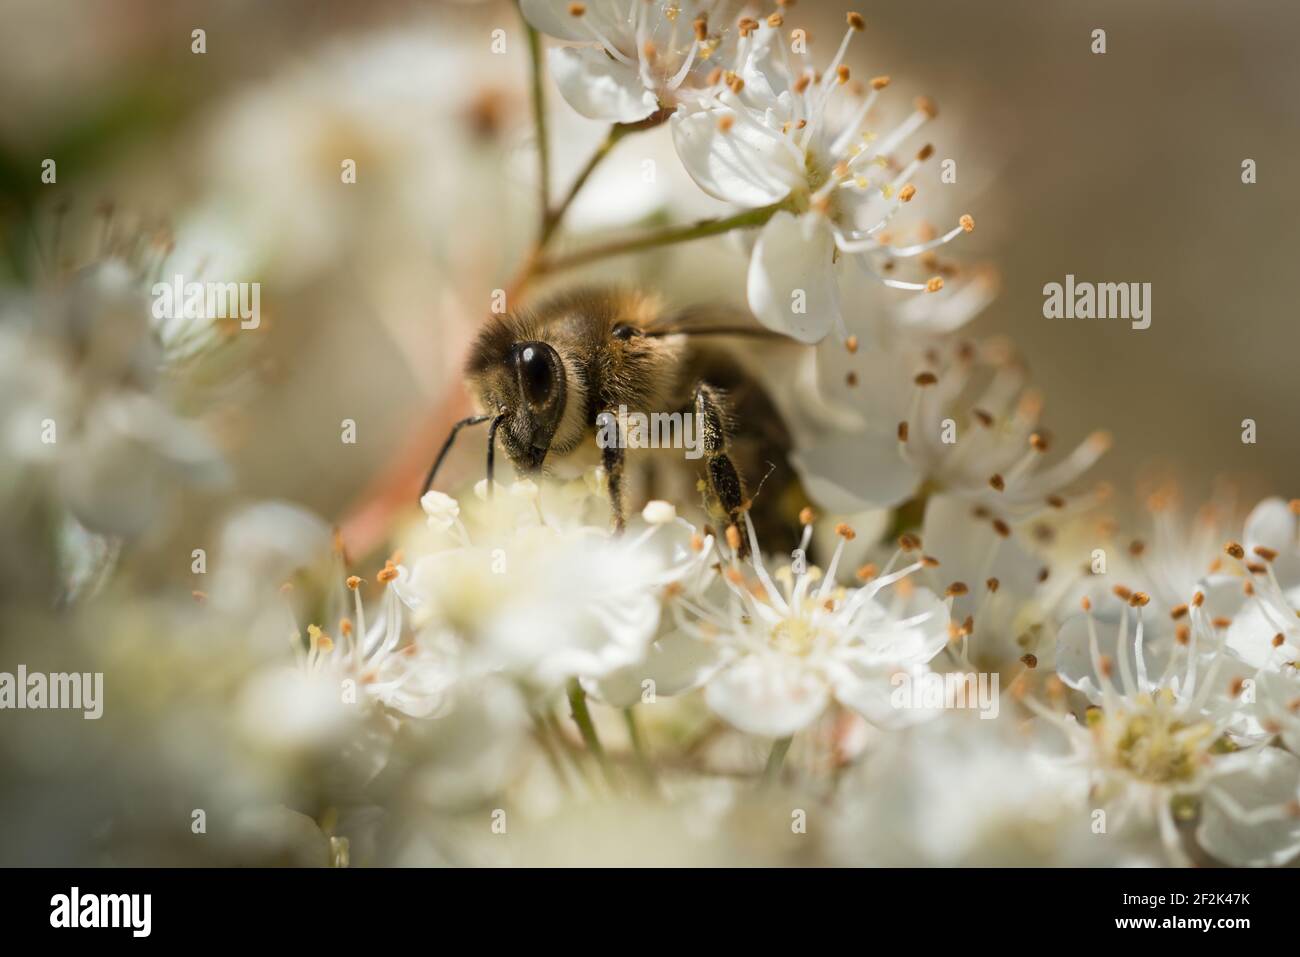 A European honey bee (Apis mellifera) on the flowers of a firethorn, or pyracantha, in a garden in Exeter, Devon, UK. Stock Photo